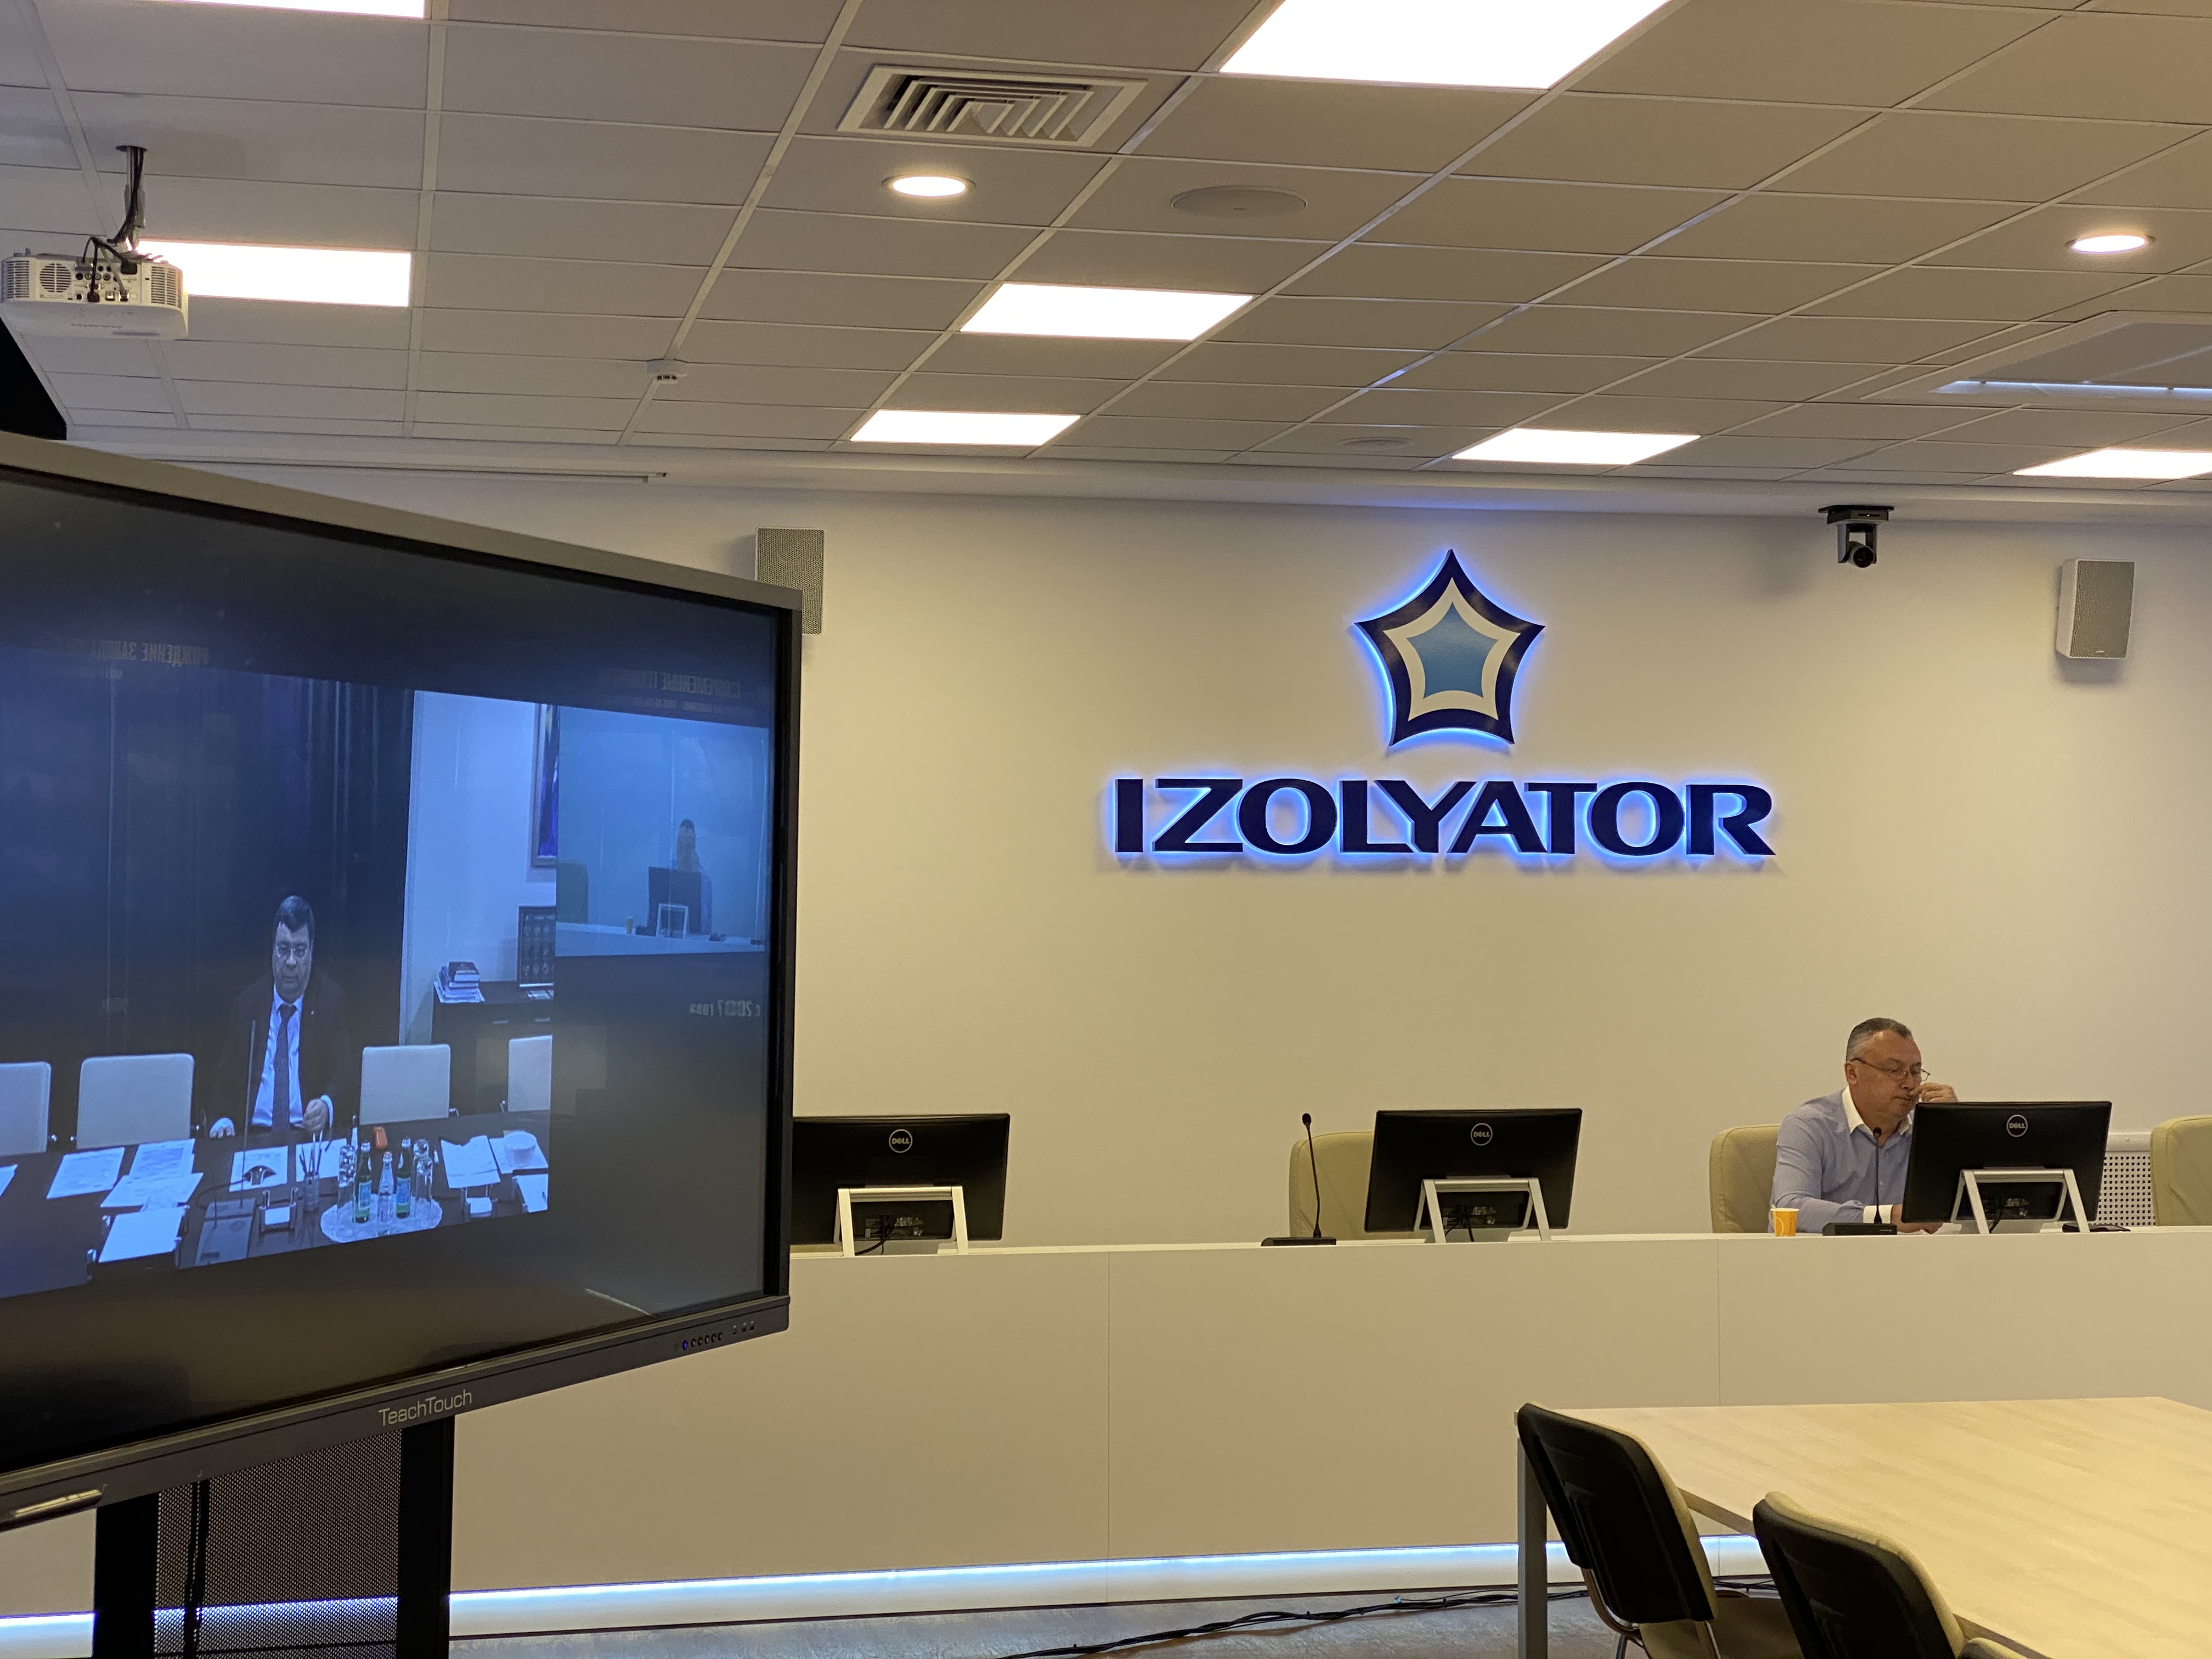 CEO of Electrozavod Holding Company Leonid Makarevich and CEO of Zavod Izolyator LLC Alexander Slavinsky at a video conference